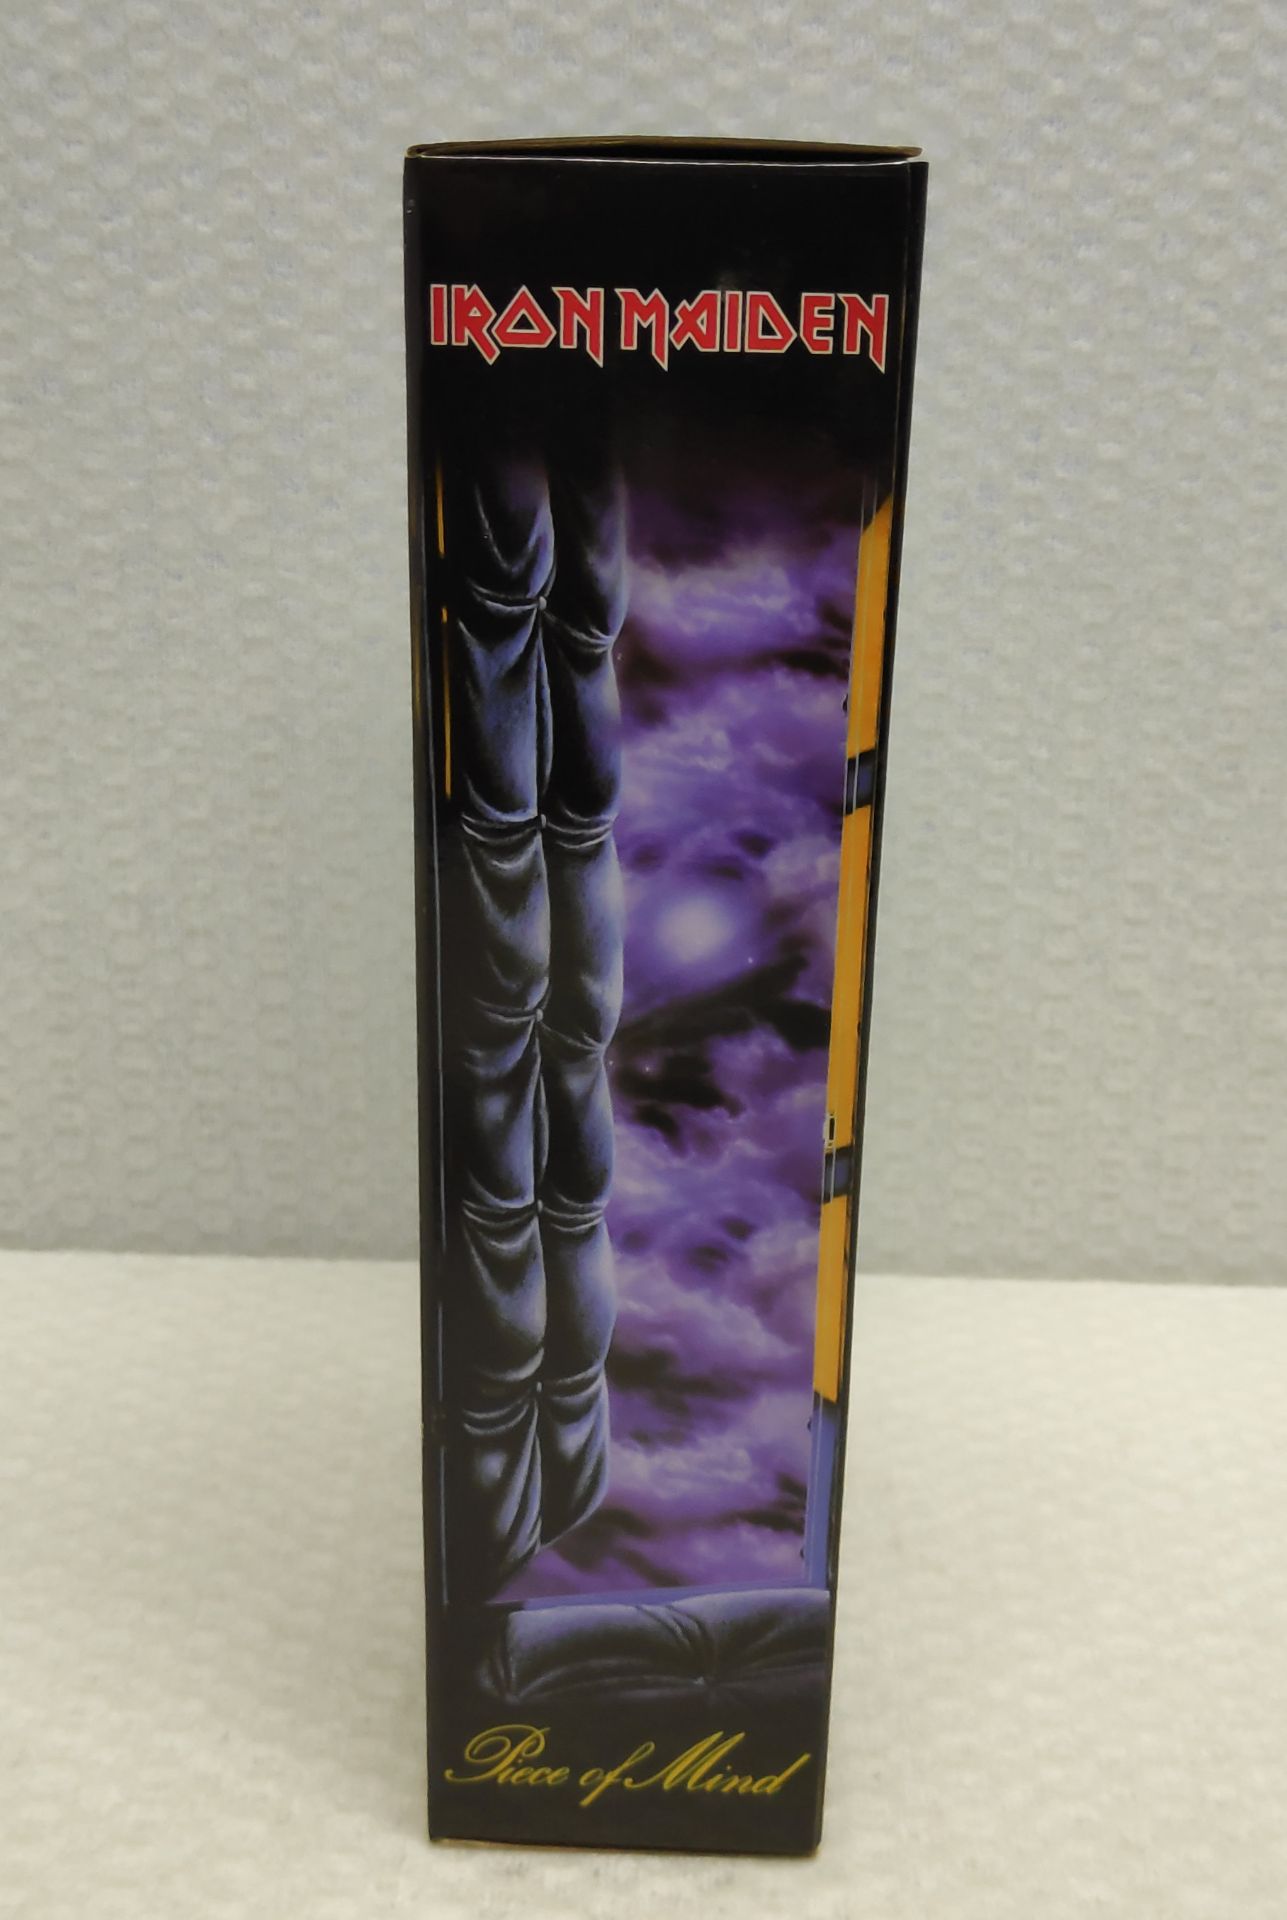 1 x Iron Maiden Eddie Piece of Mind NECA Action Figure - New/Boxed - HTYS166 - CL720 - Location: Alt - Image 7 of 11